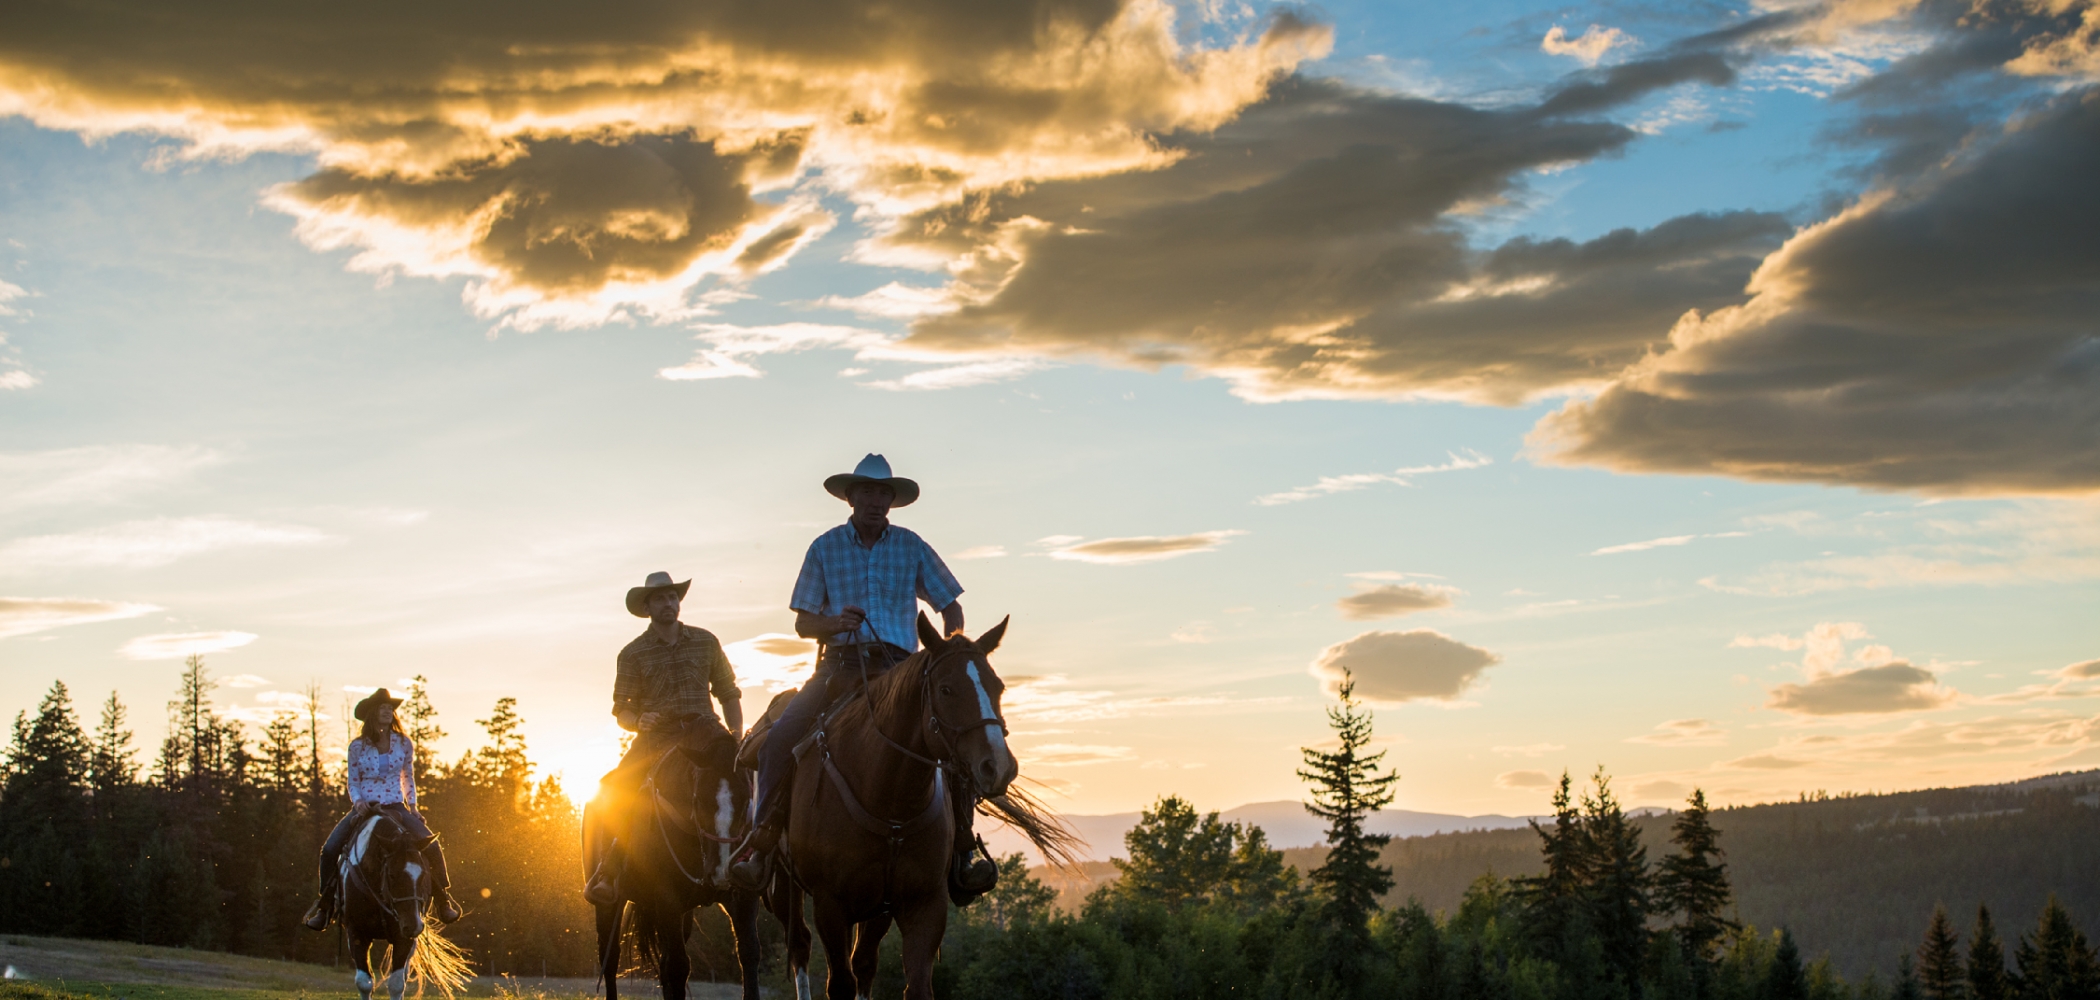 Echo Valley Guest Ranch and Spa | Blake Jorgenson